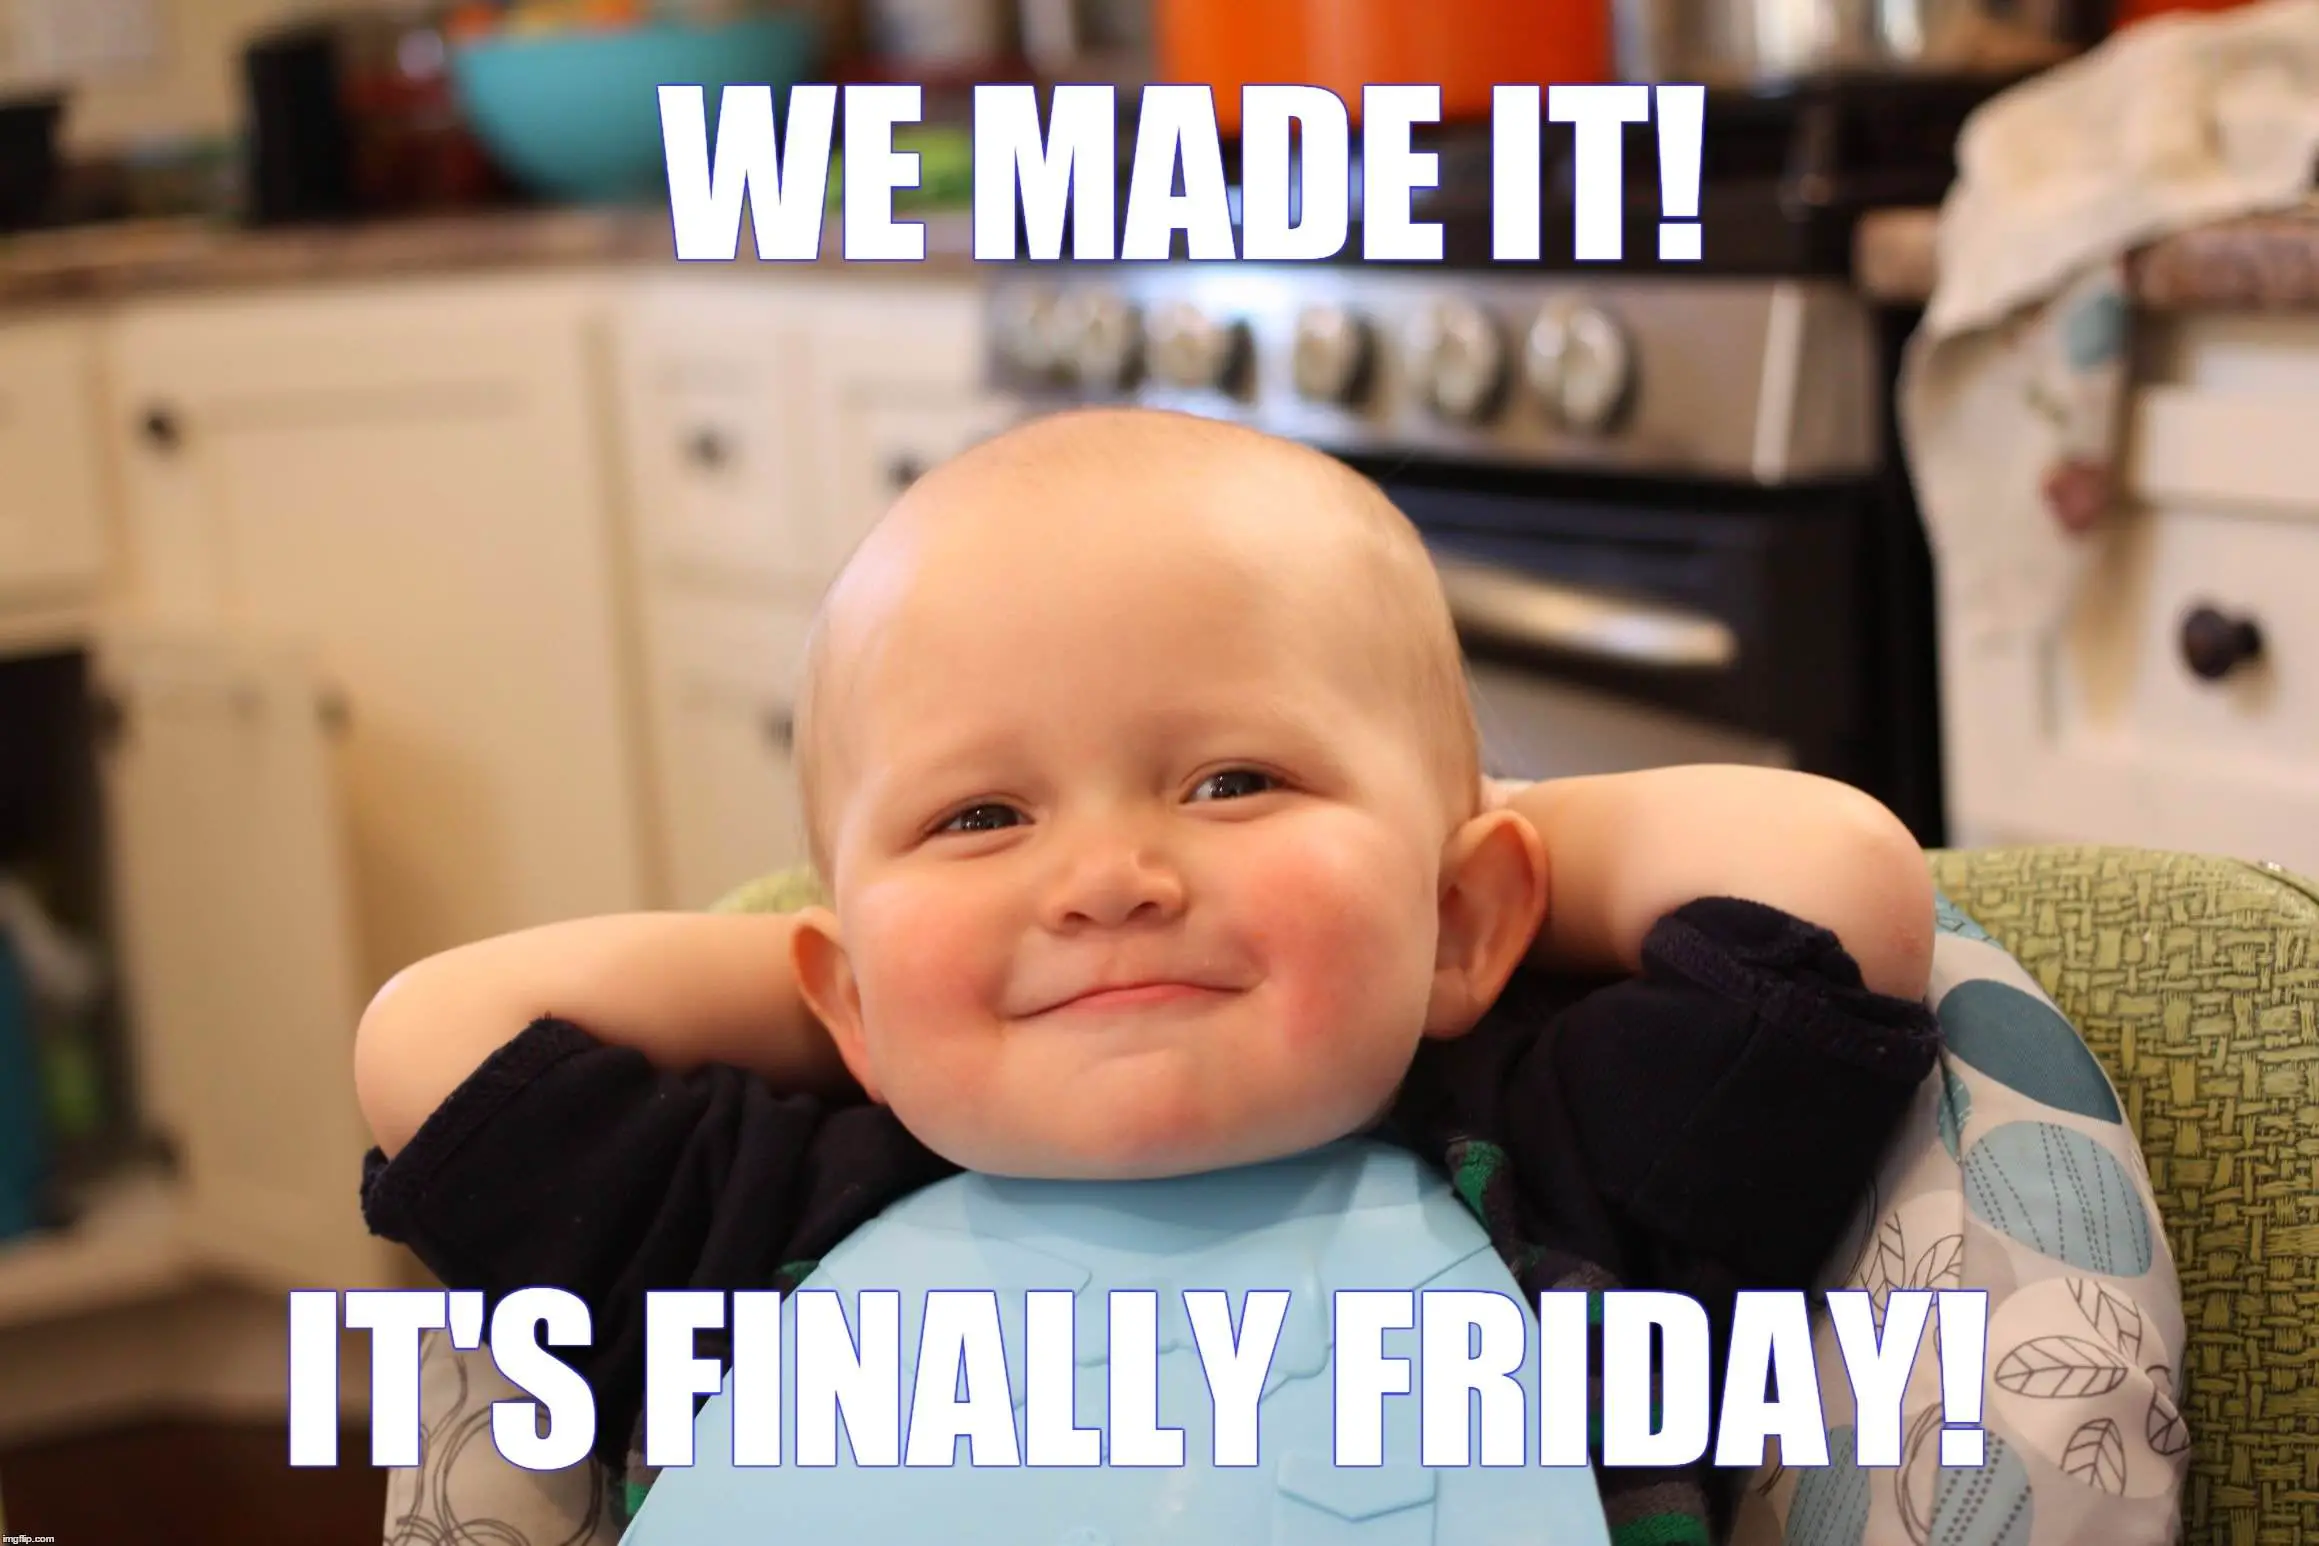 Thank God it's Friday! | Funny Friday Stuff to Share